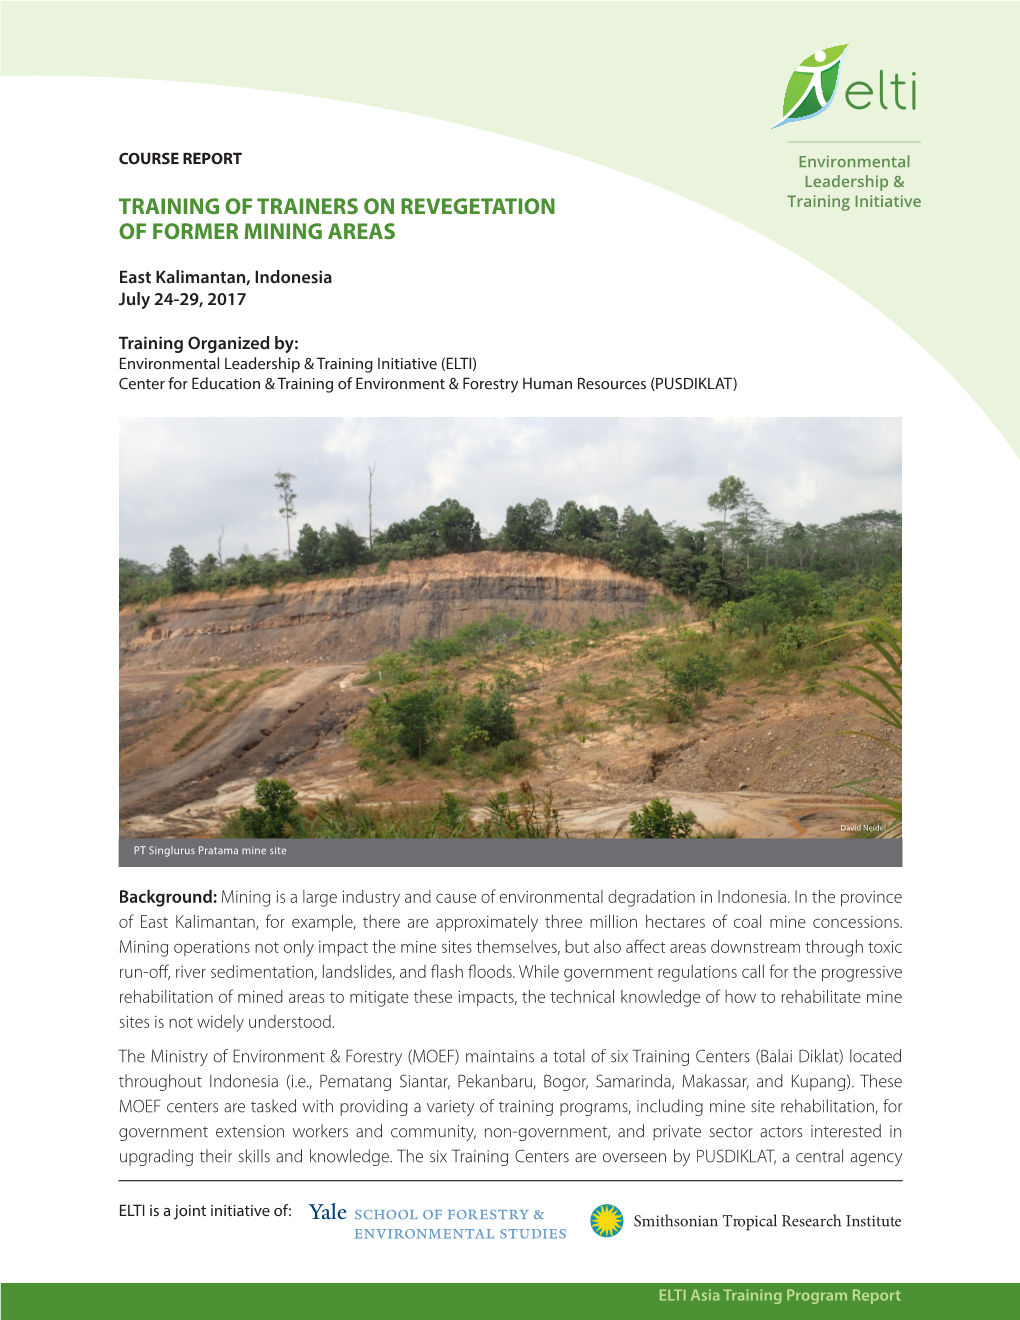 Training of Trainers on Revegetation of Former Mining Areas